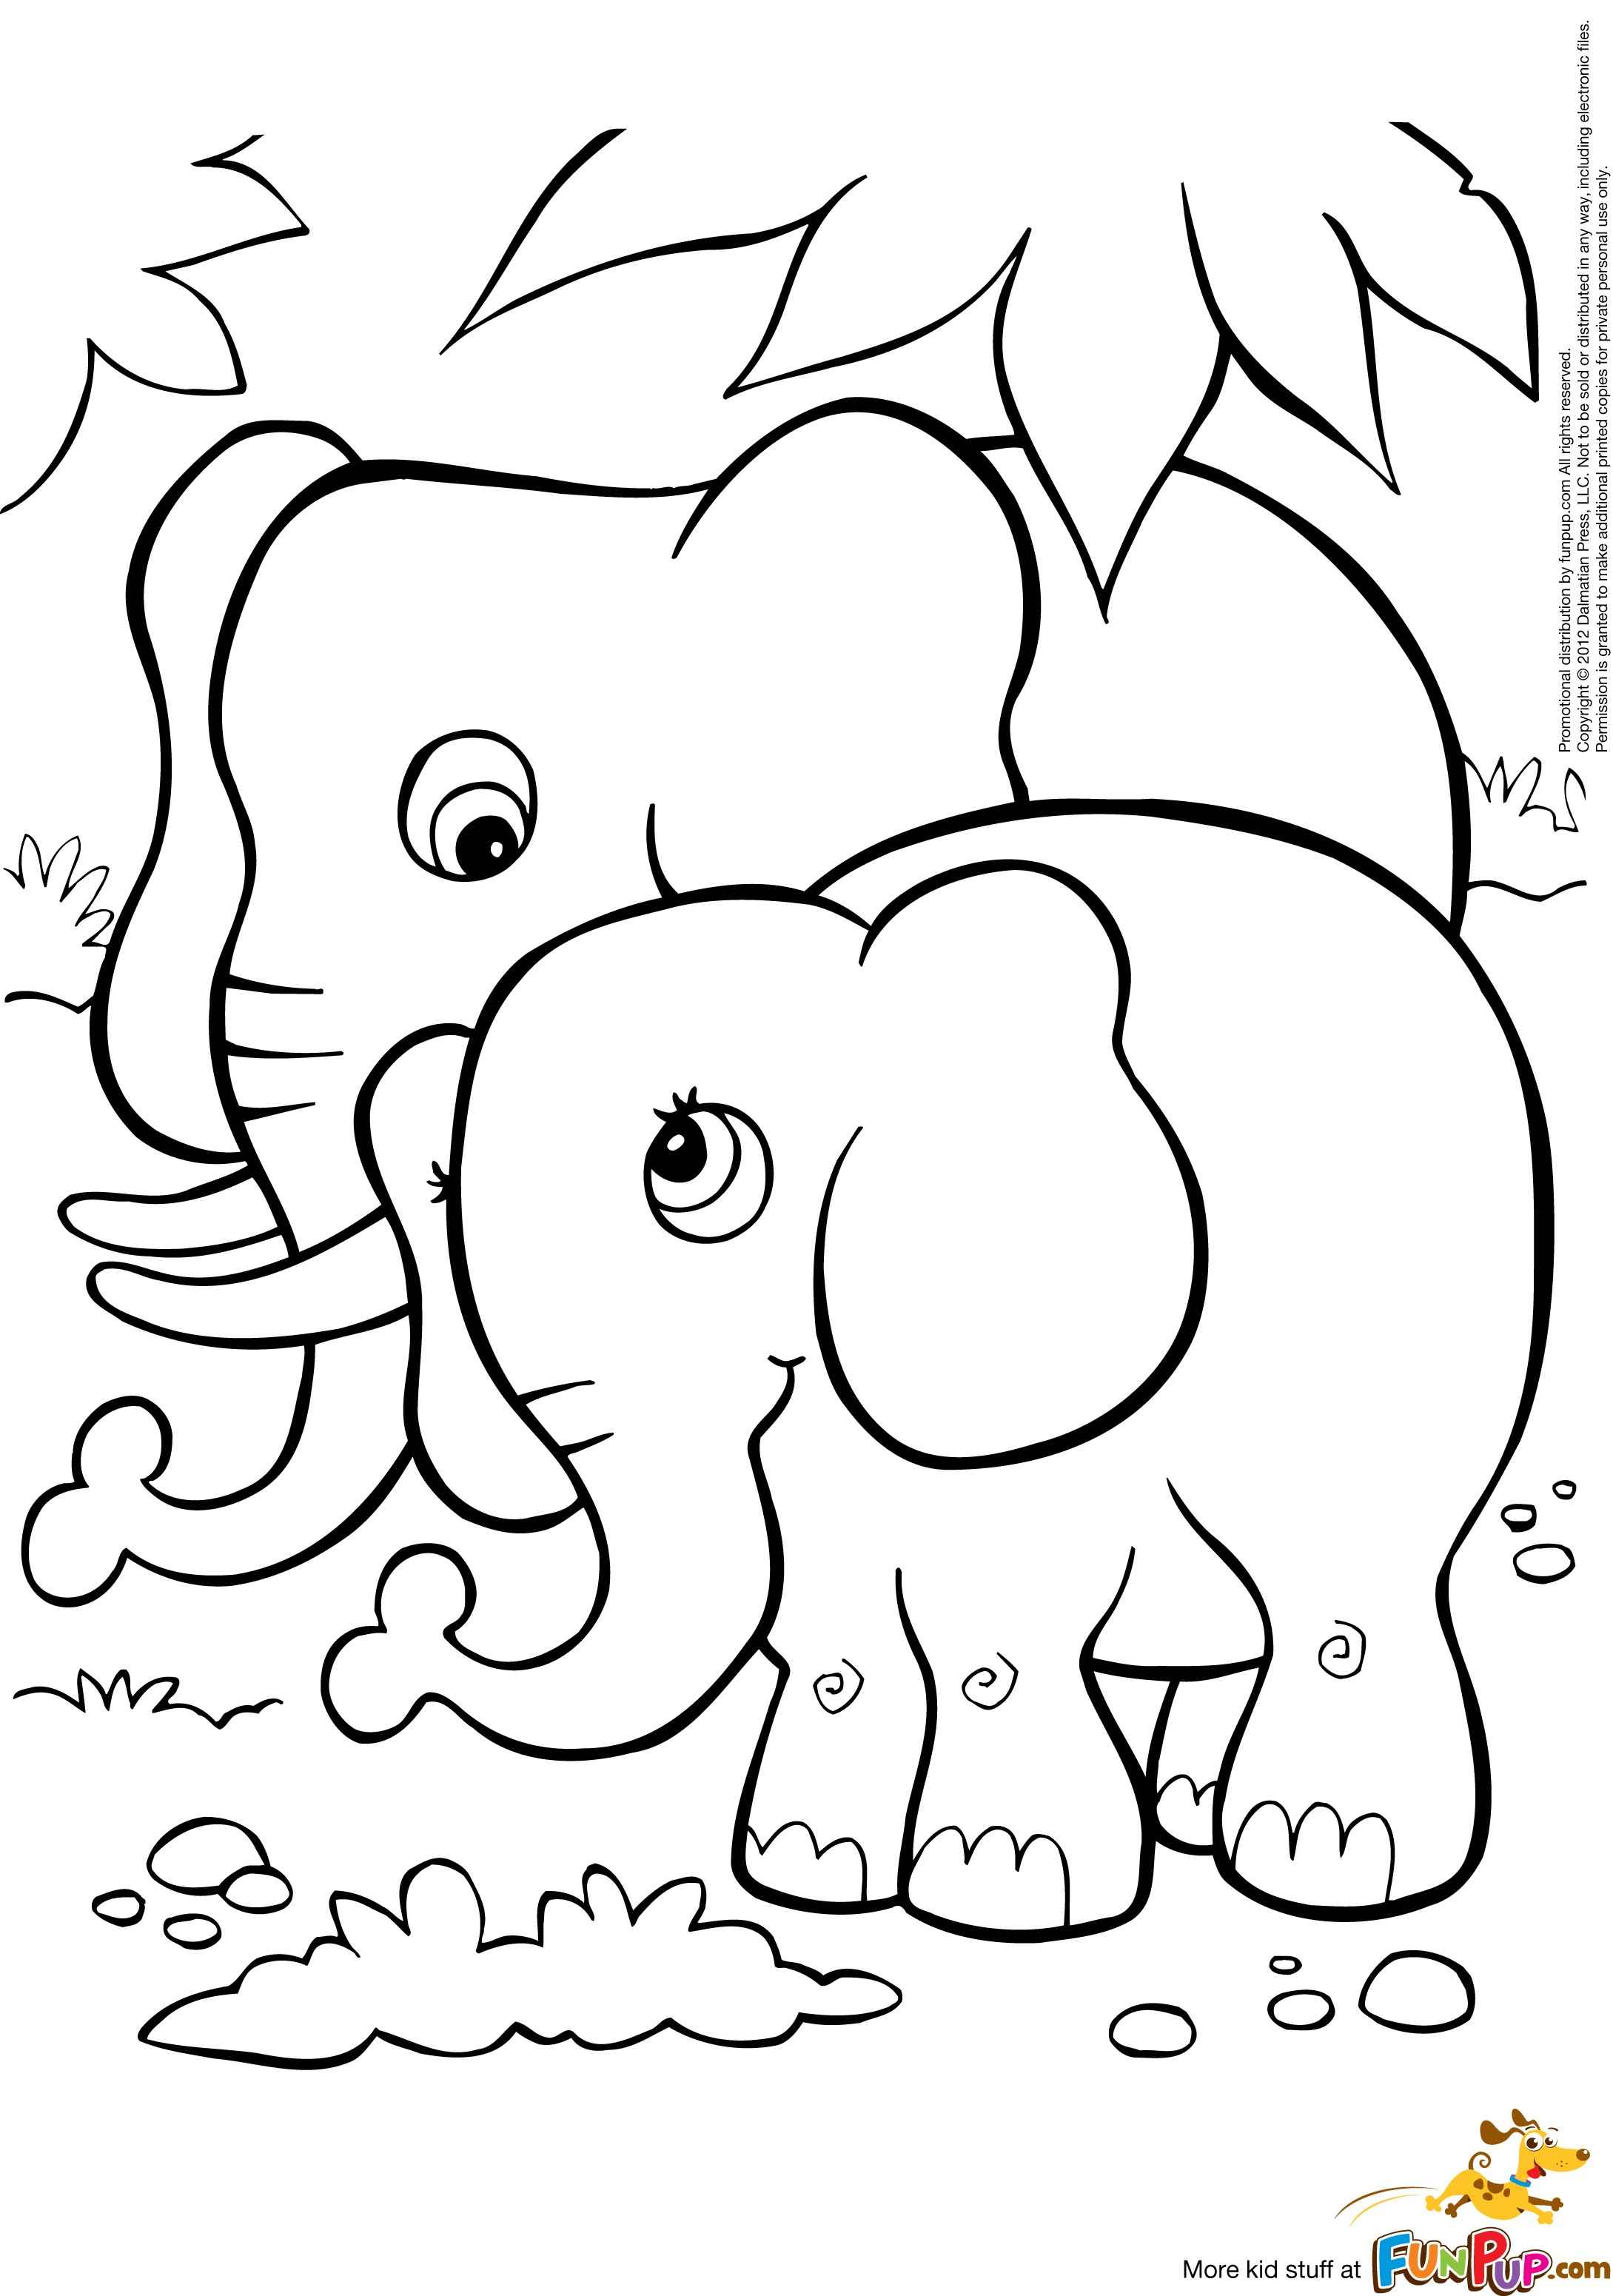 Online Baby Elephant Coloring Page: A Fun Method of Coloring ...